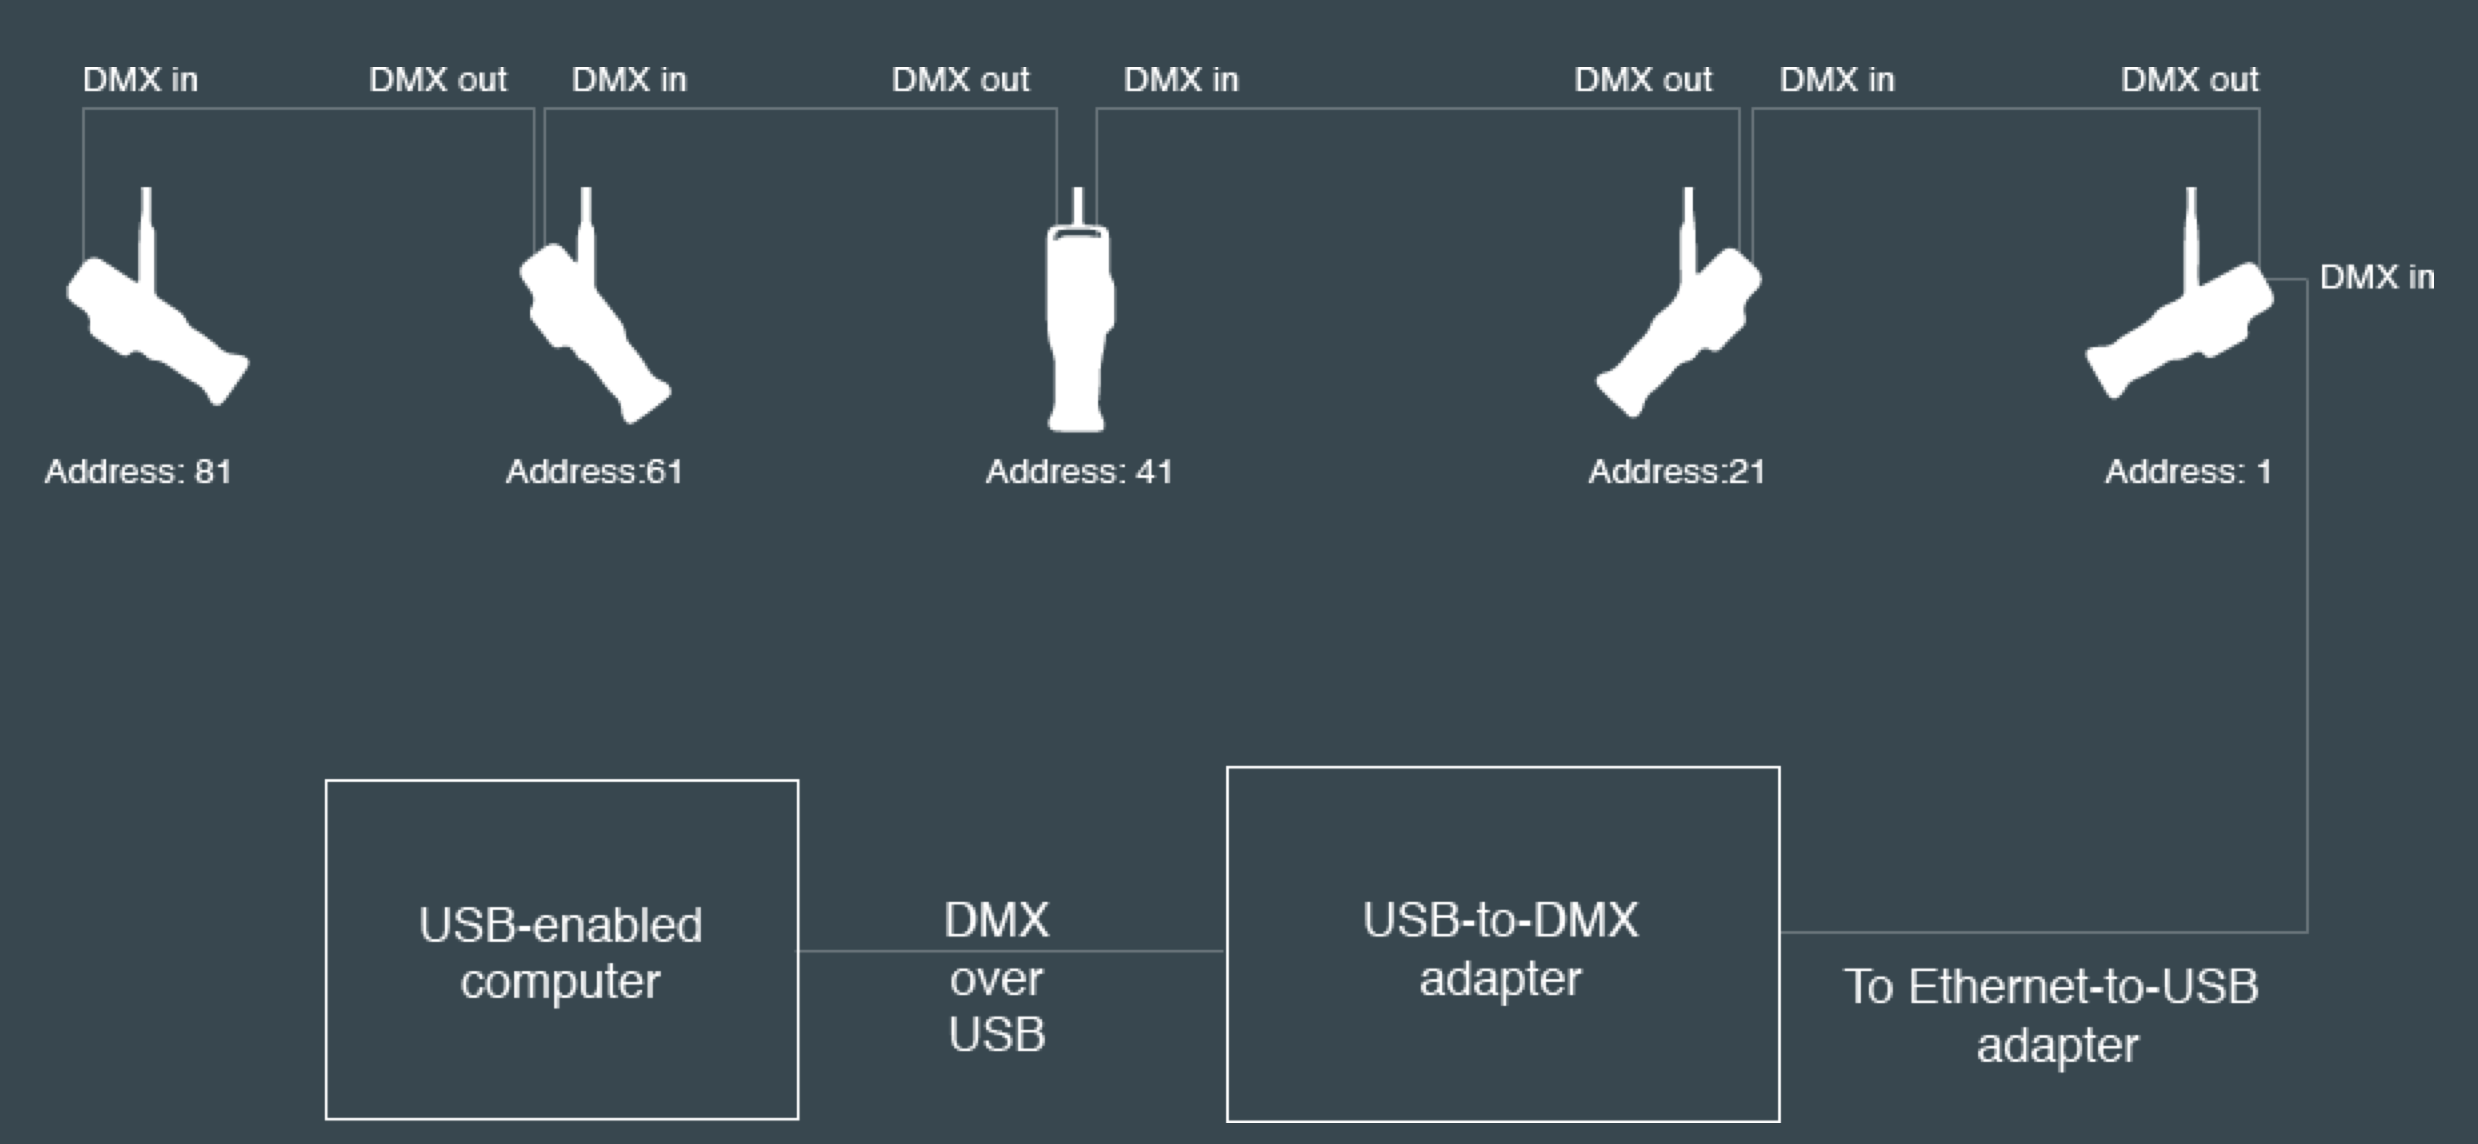 Figure 12. A  DMX universe controlled by a personal computer using a USB-to-DMX adapter.